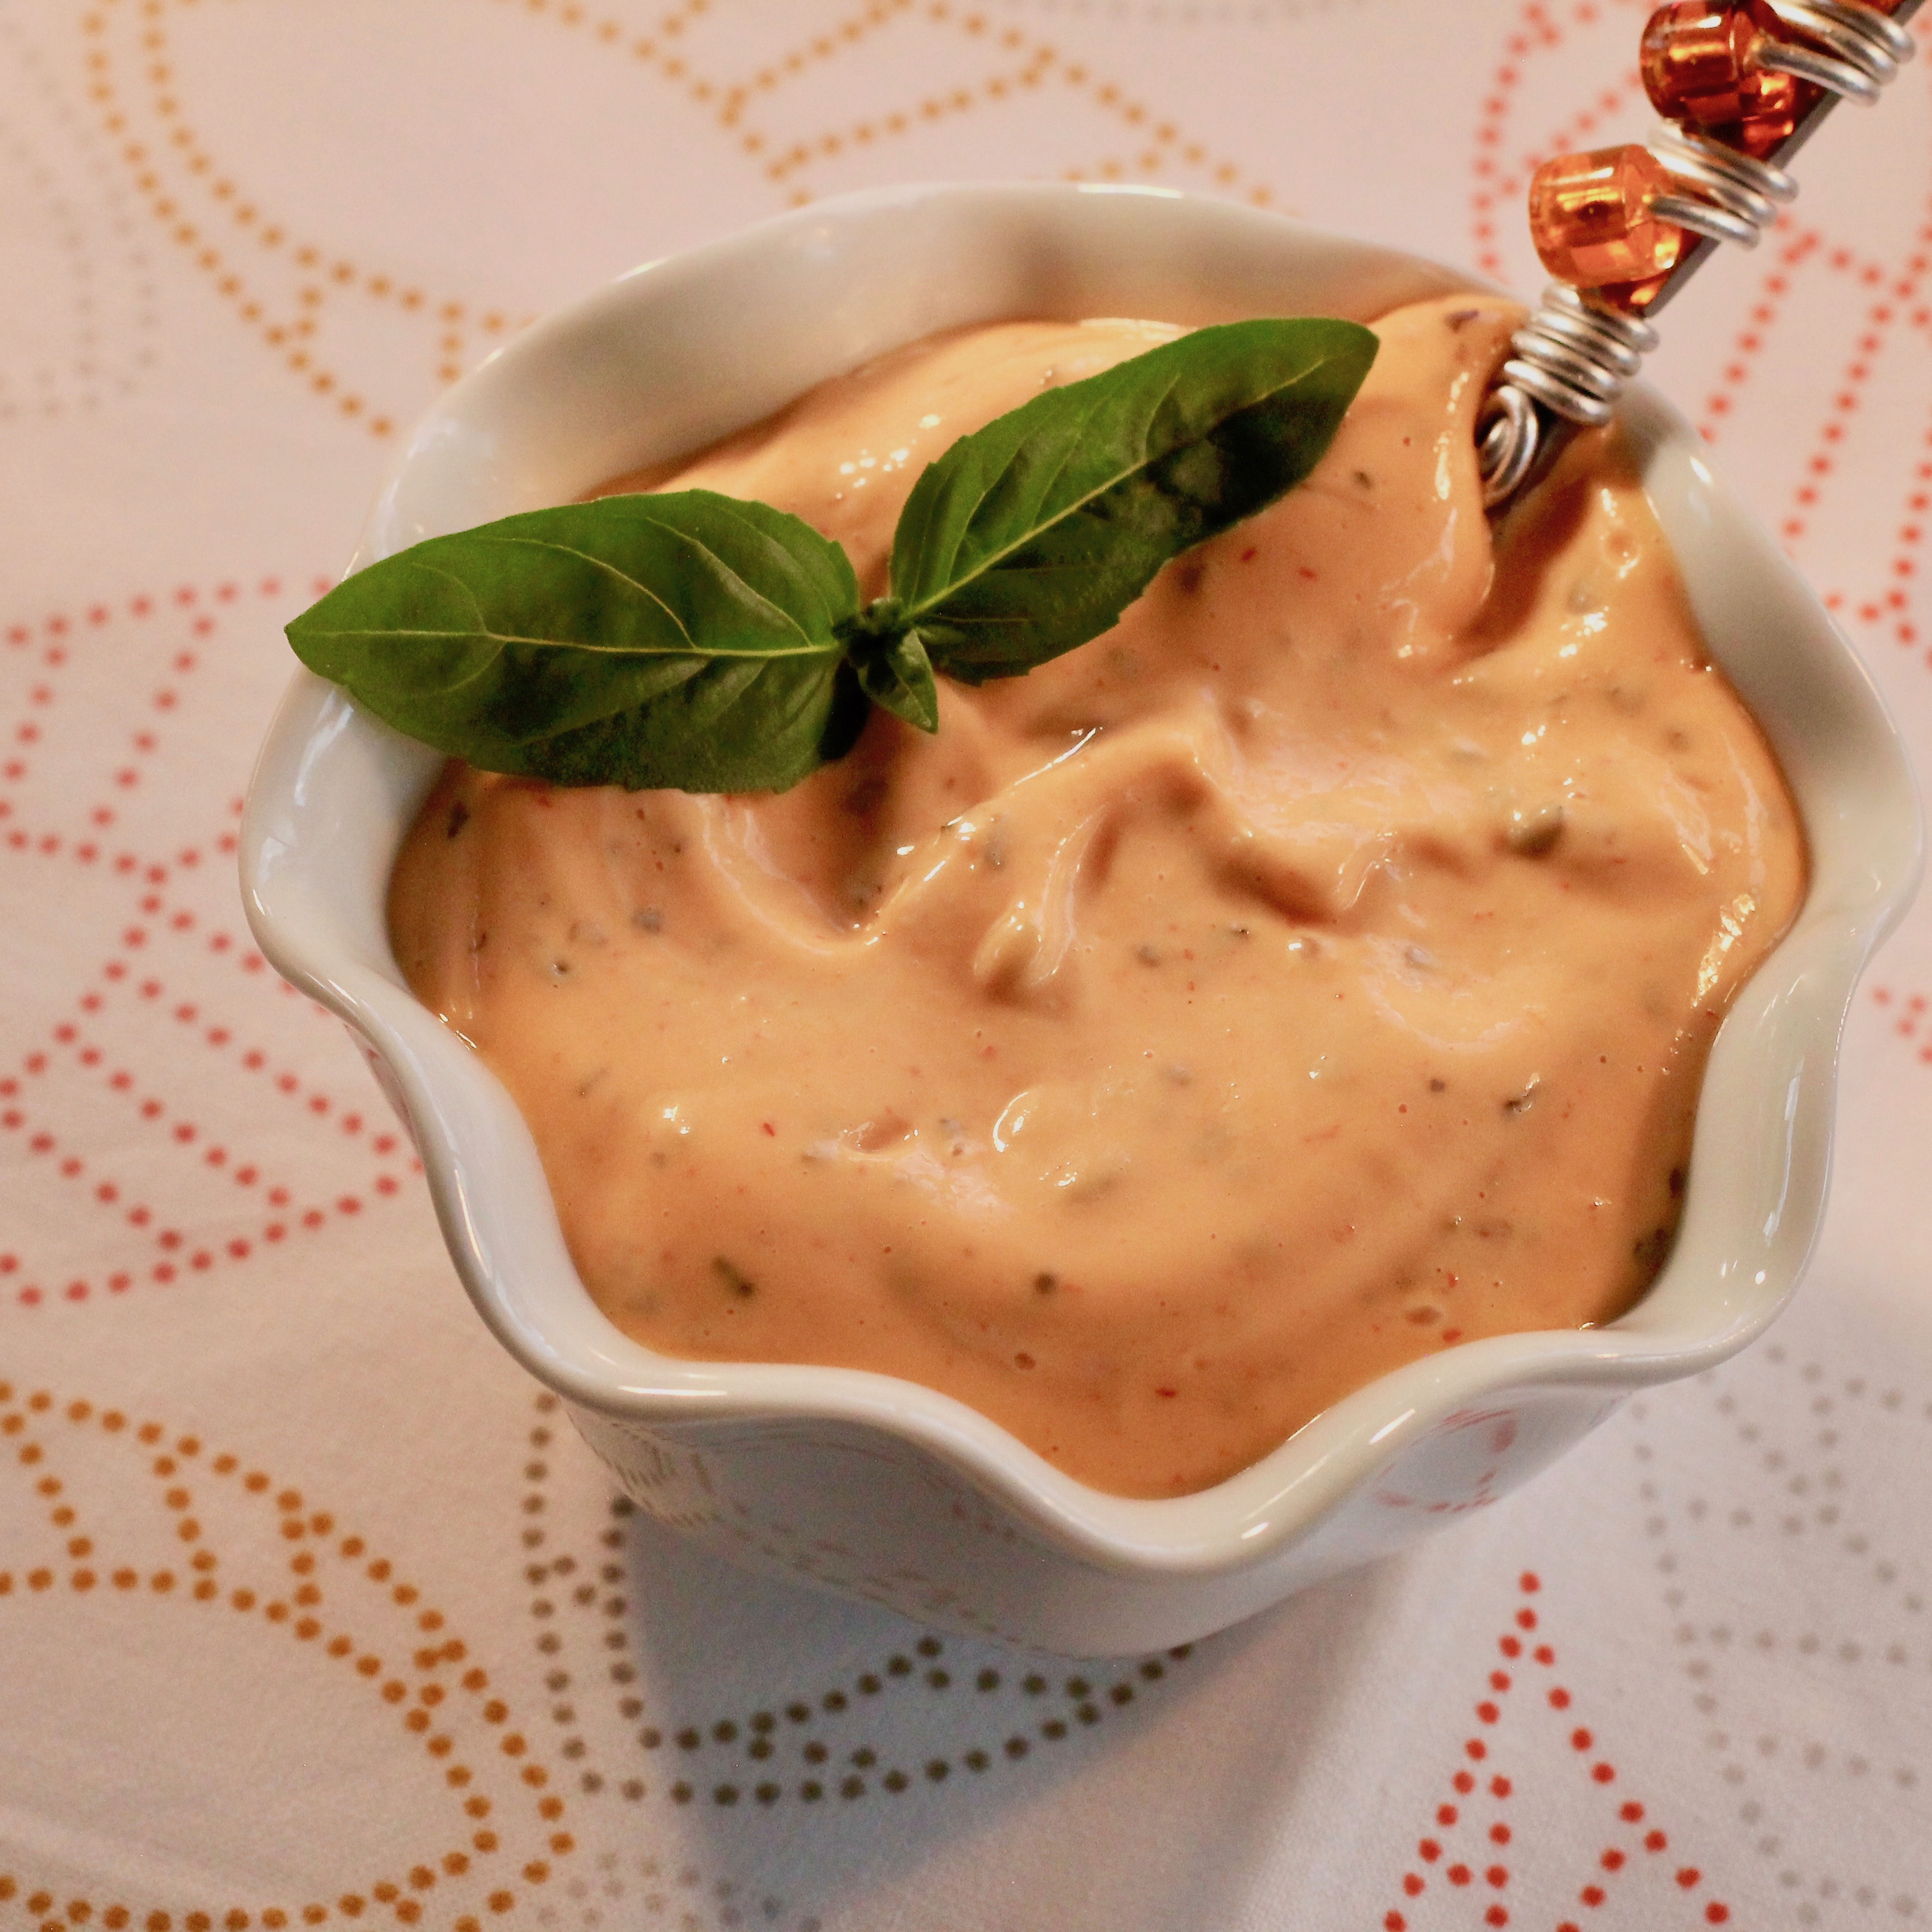 Spicy Basil Mayo Summer Condiment